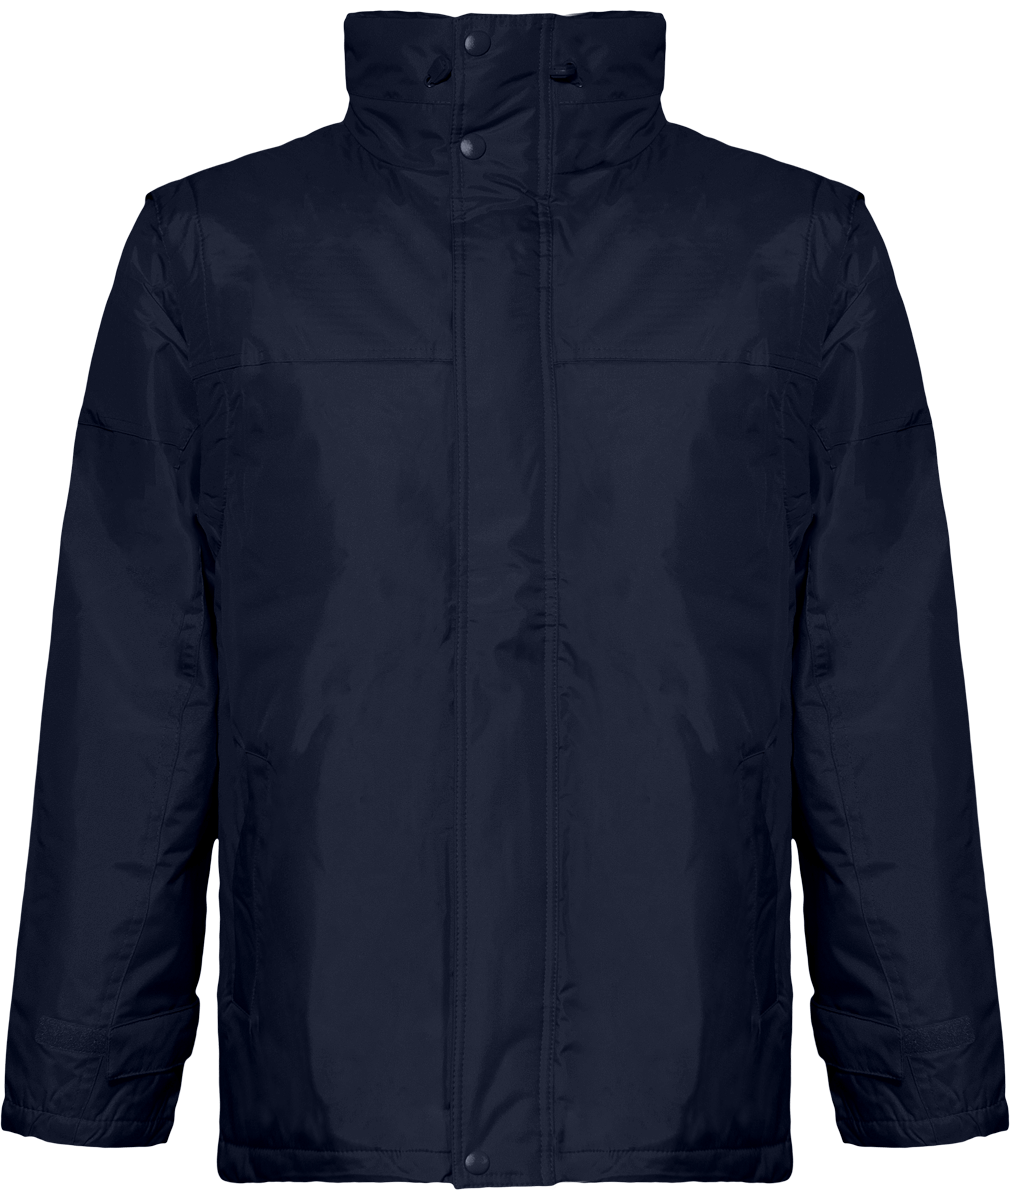 Premium Quality Factory Removable Sleeve Jacket To Personalise Navy